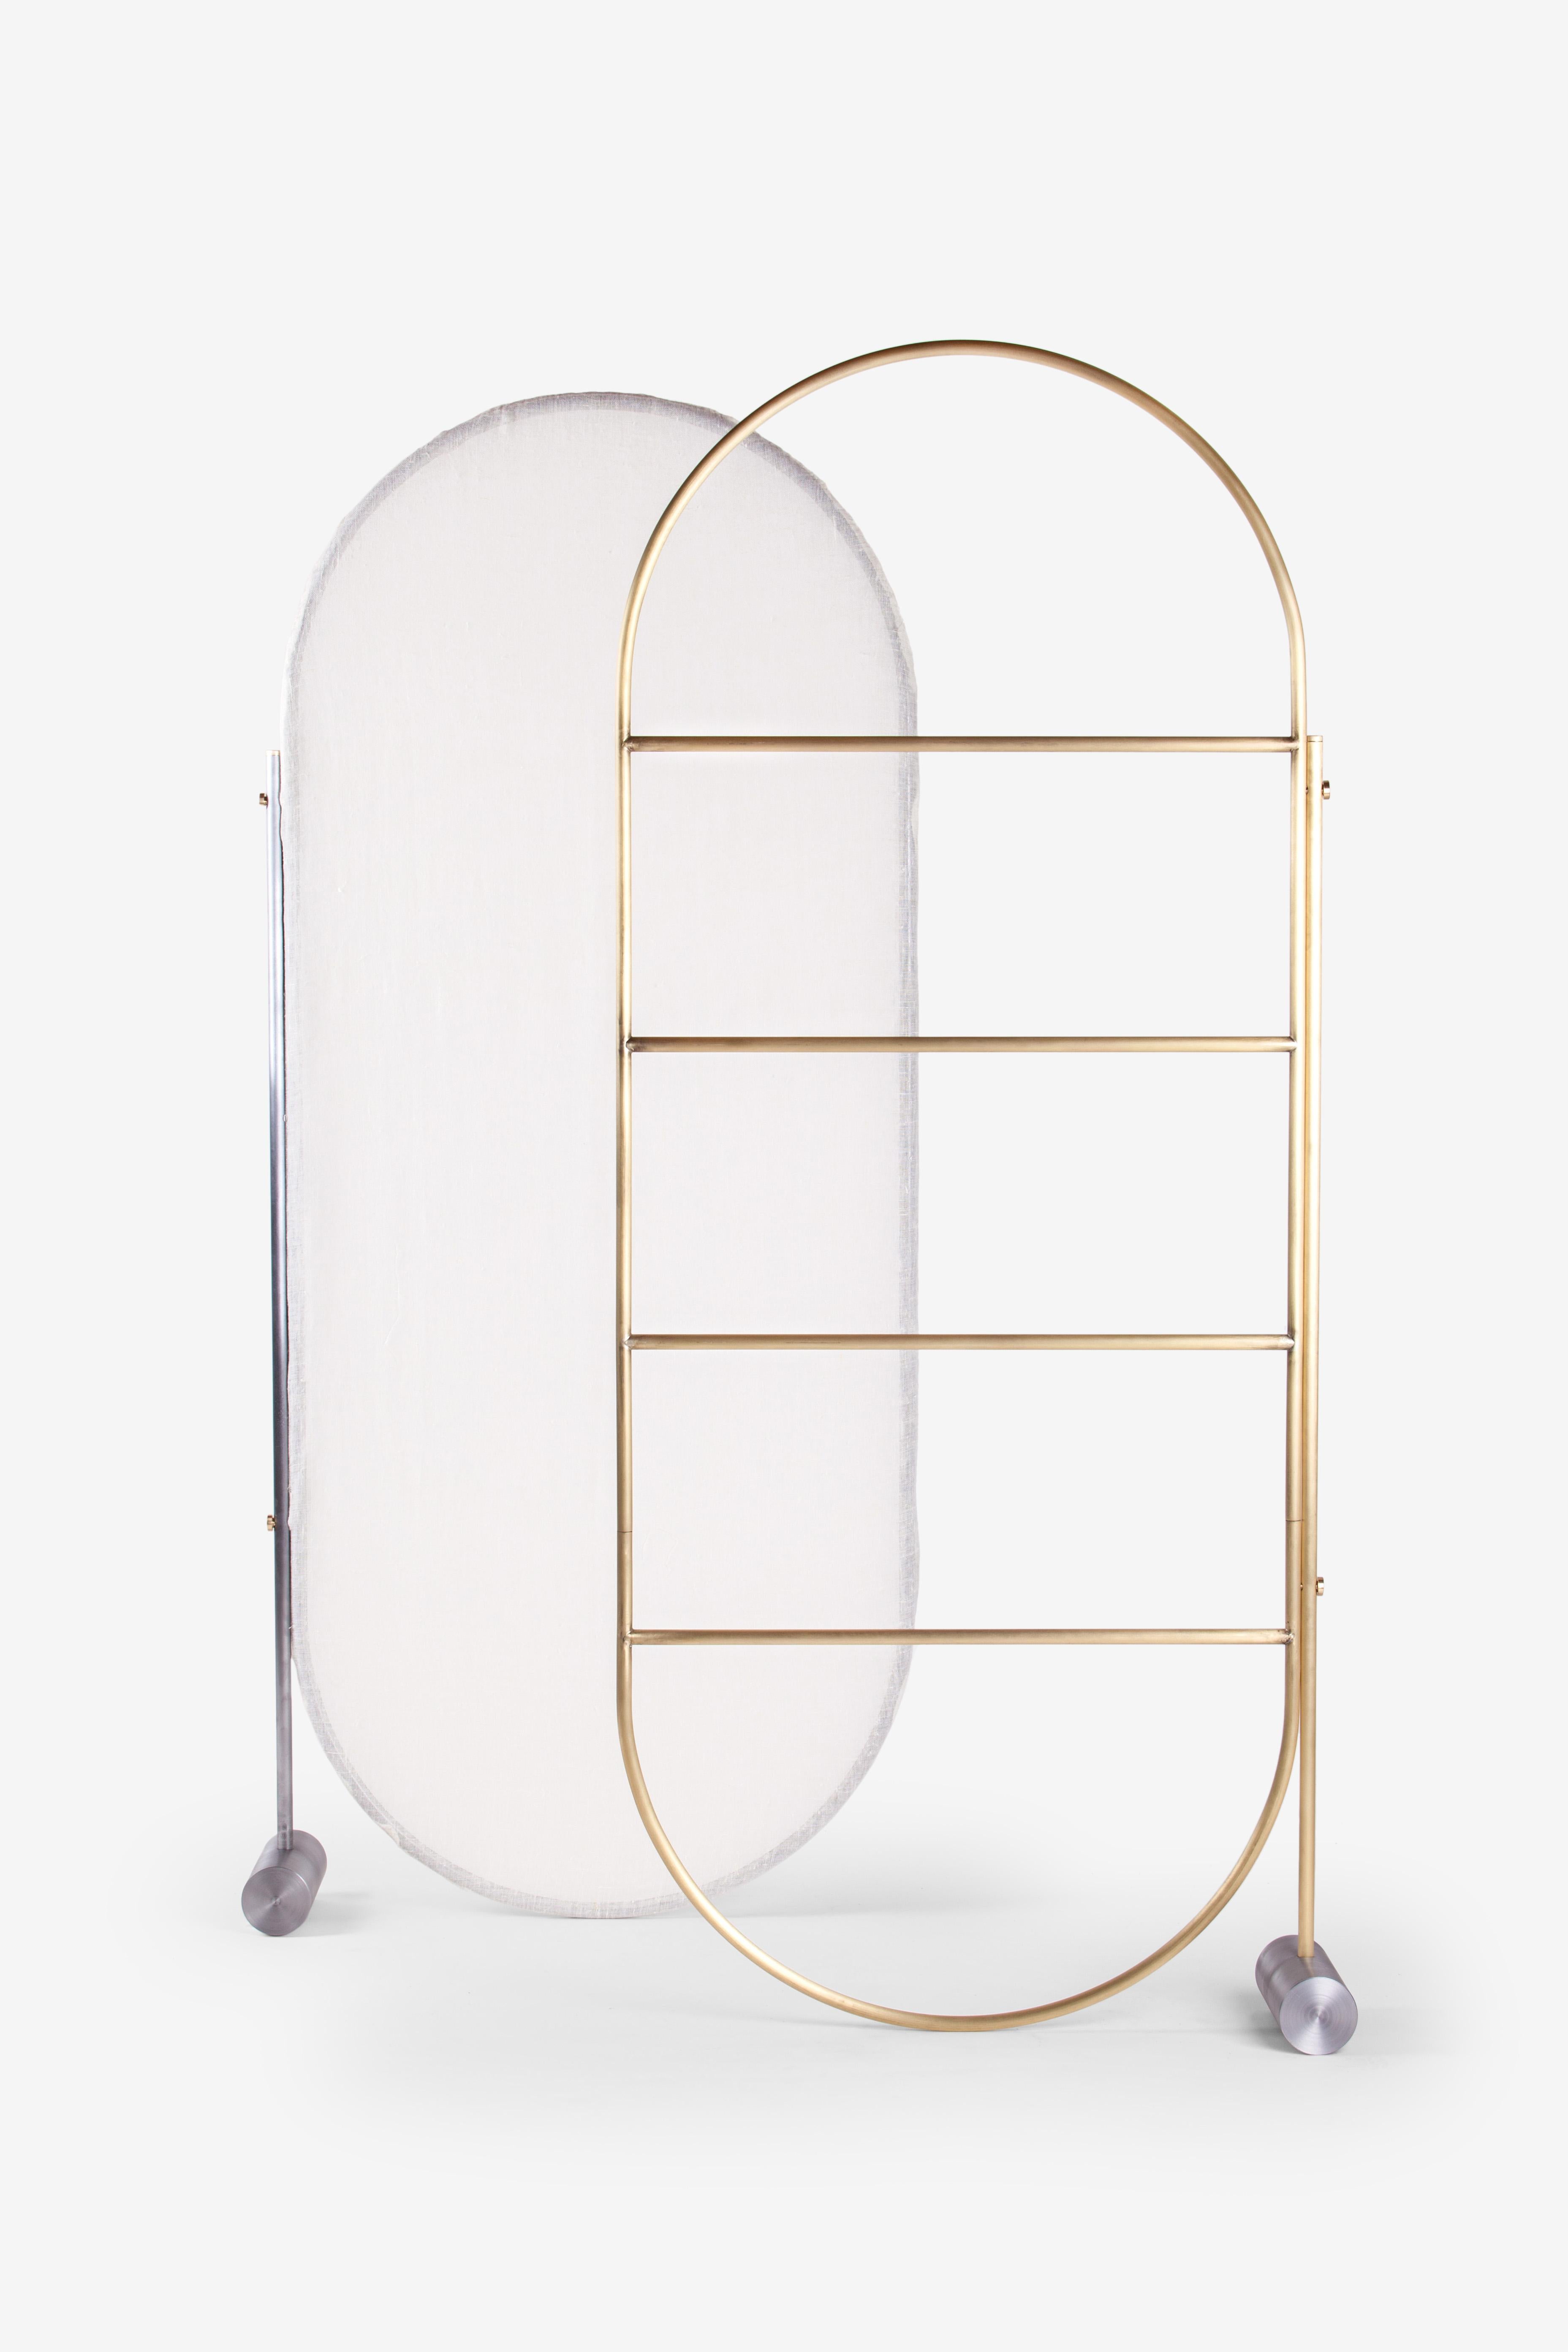 Set of 2 Separè room Dividers vby Mingardo
Dimensions: D72 x W20 x H170 cm 
Materials: satin natural brass structure. Iron base. Fabric
Weight: 14-17 kg

Also Available in different finishes. 

Separè, is a multi-use space divider, centered